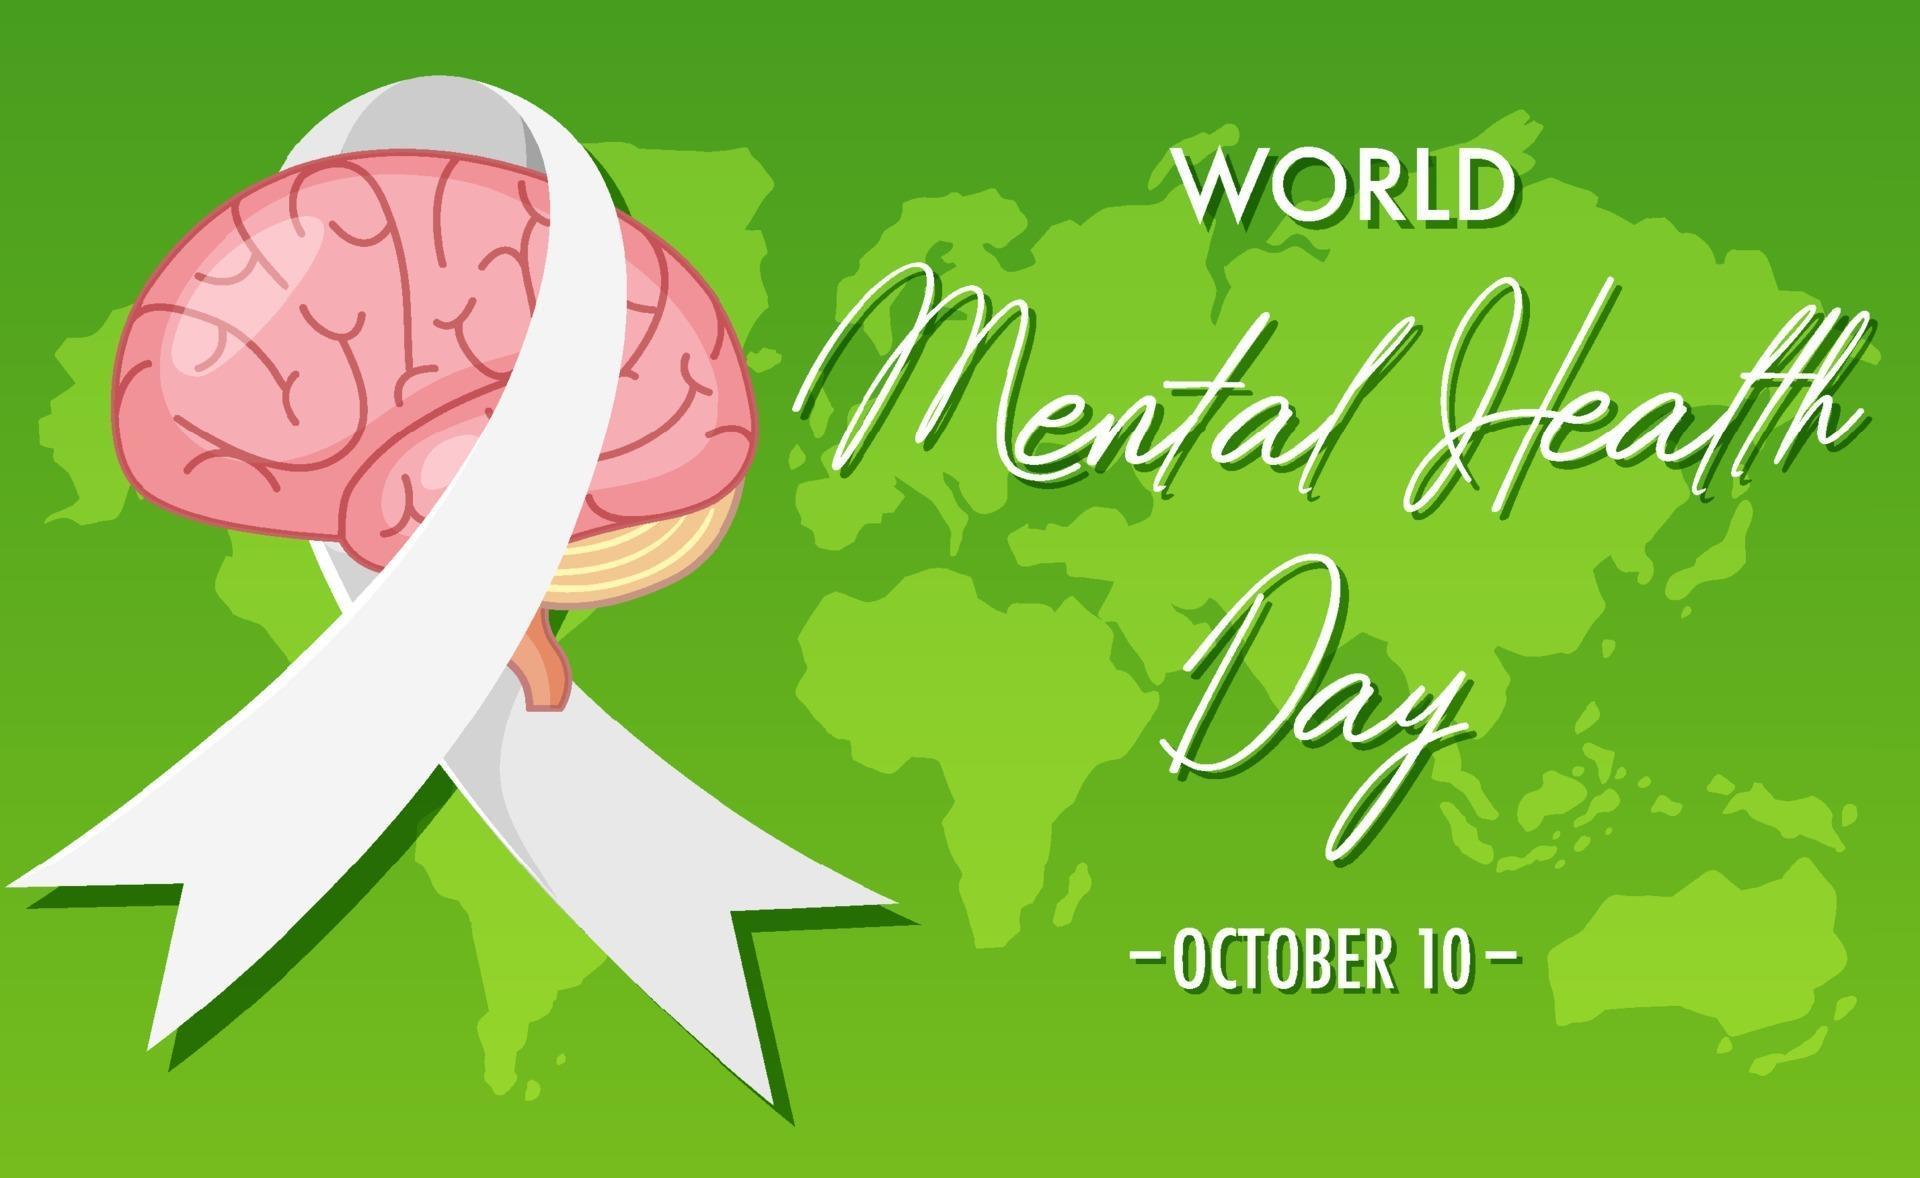 World Mental Health Day banner or logo isolated on white background